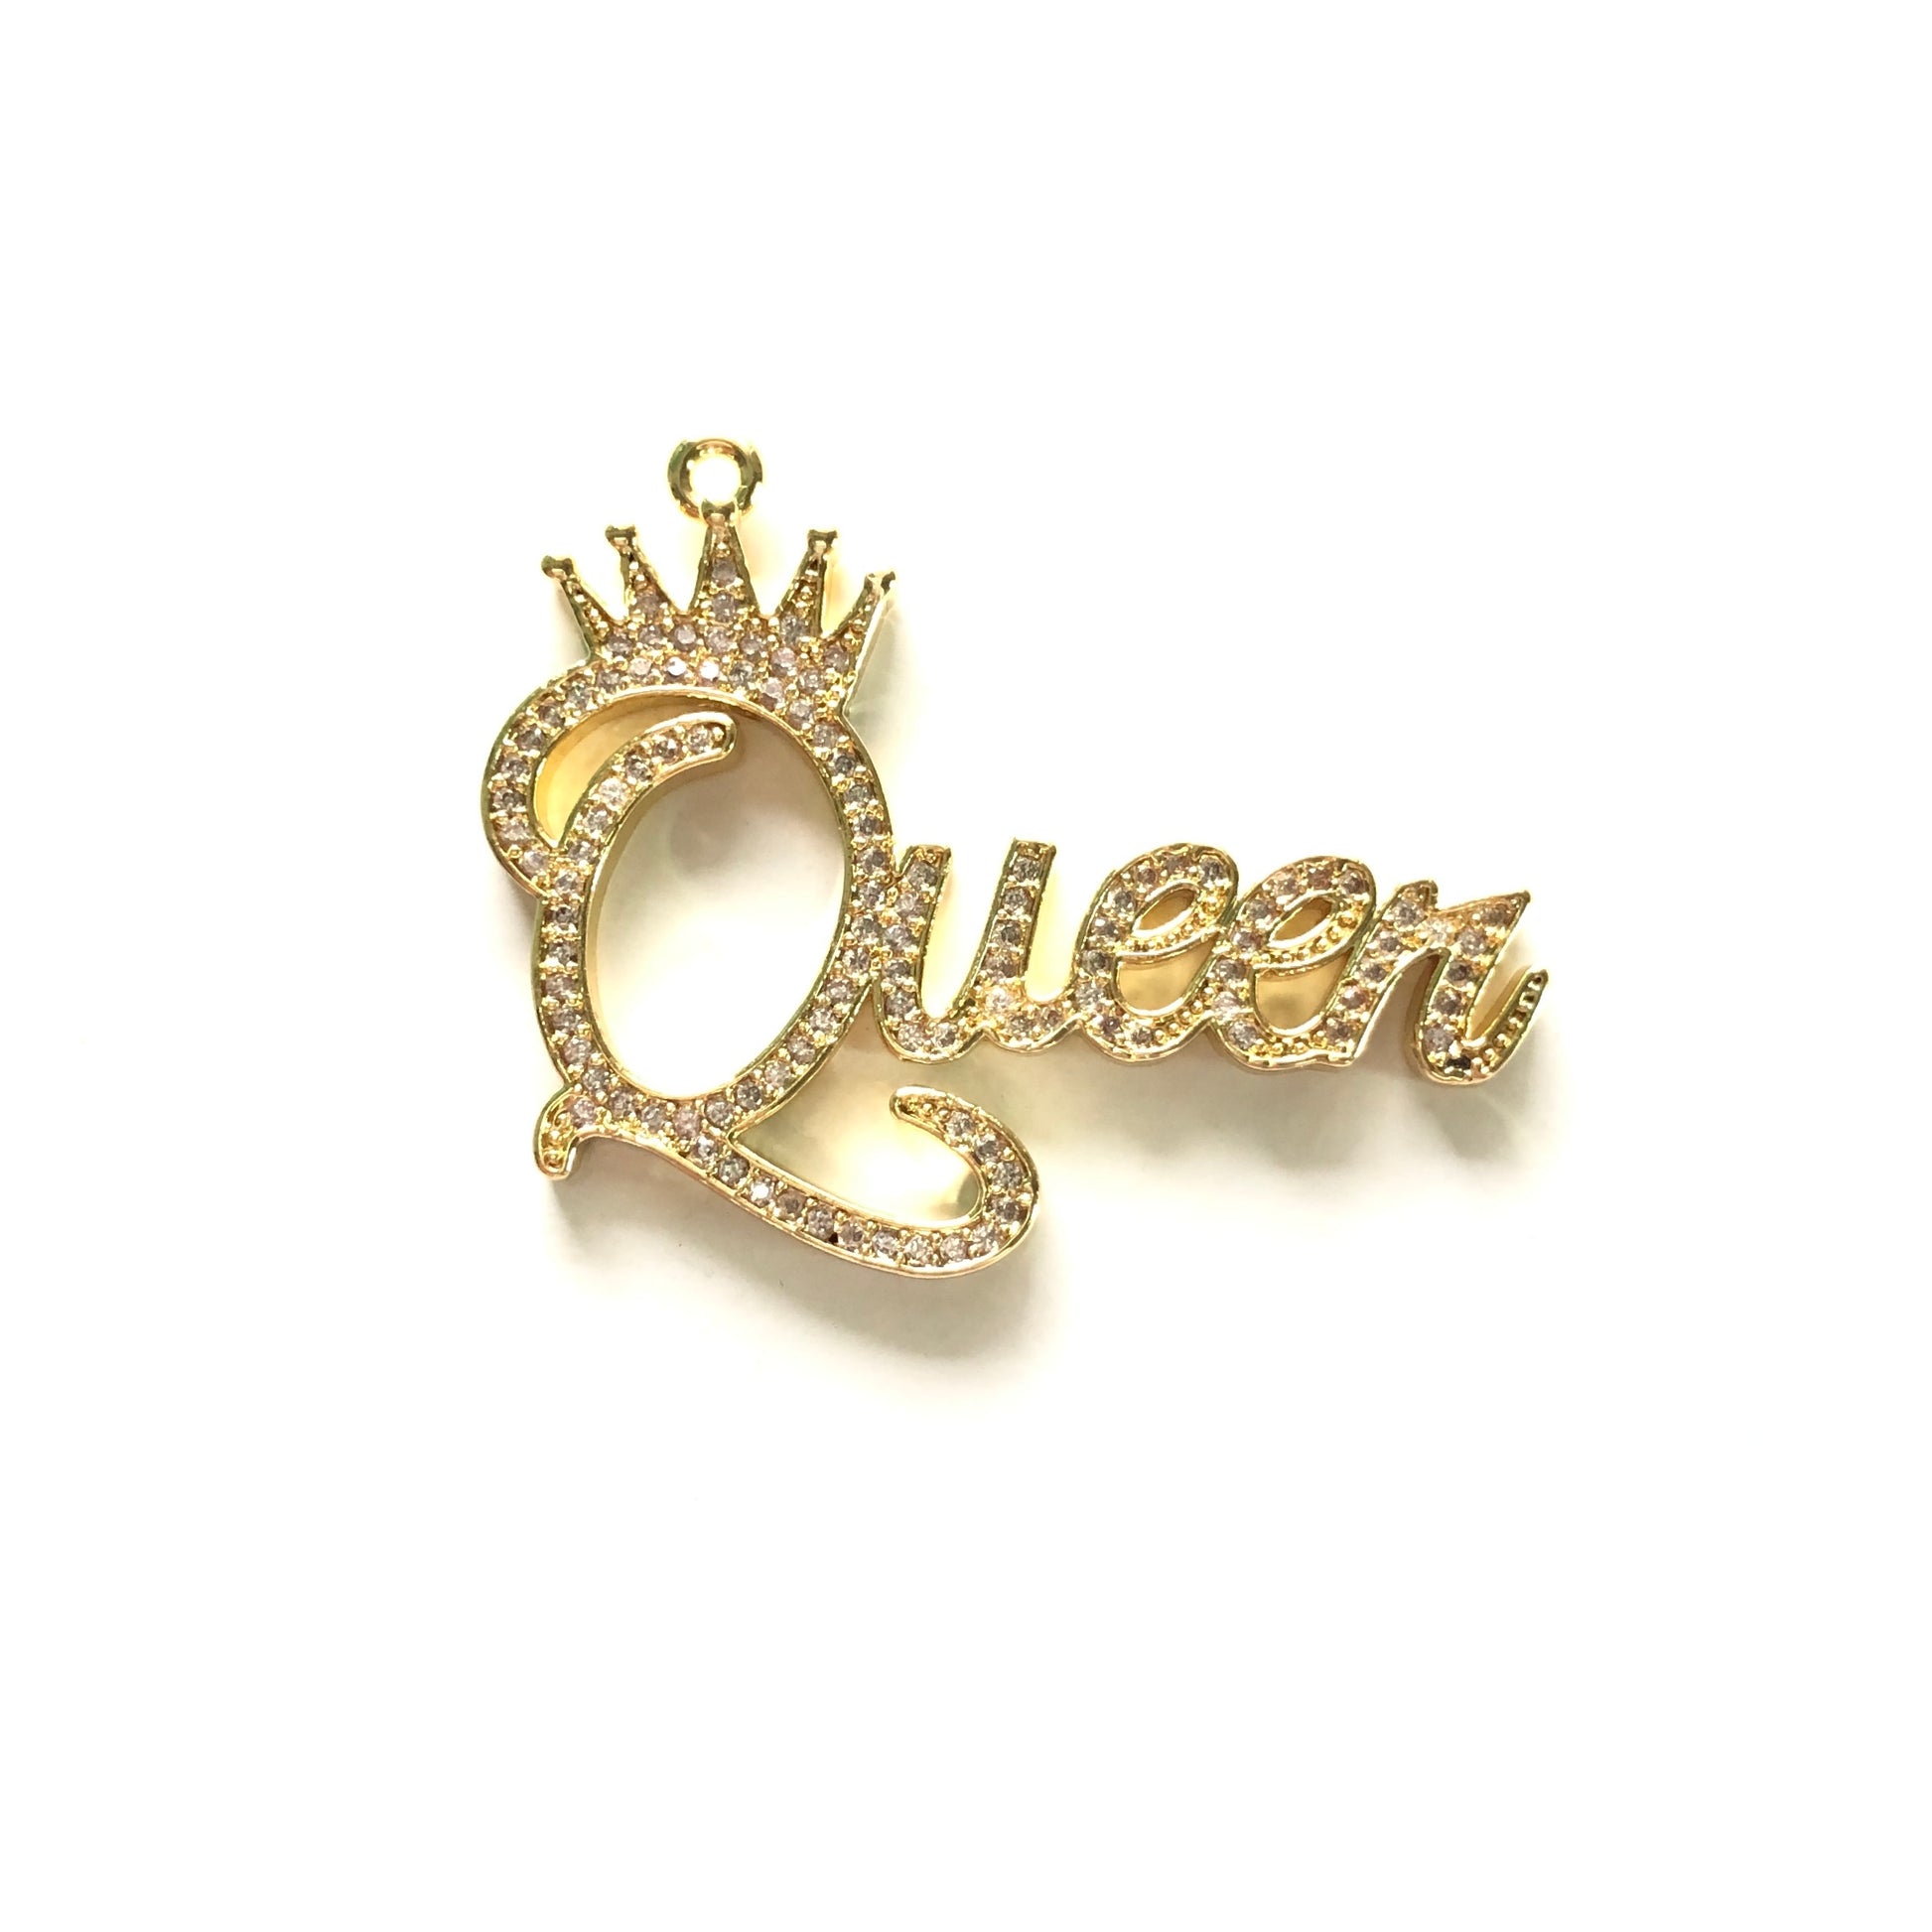 10pcs/lot 39*30mm CZ Paved Crown Queen Word Charms Gold CZ Paved Charms Crowns Queen Charms Words & Quotes Charms Beads Beyond